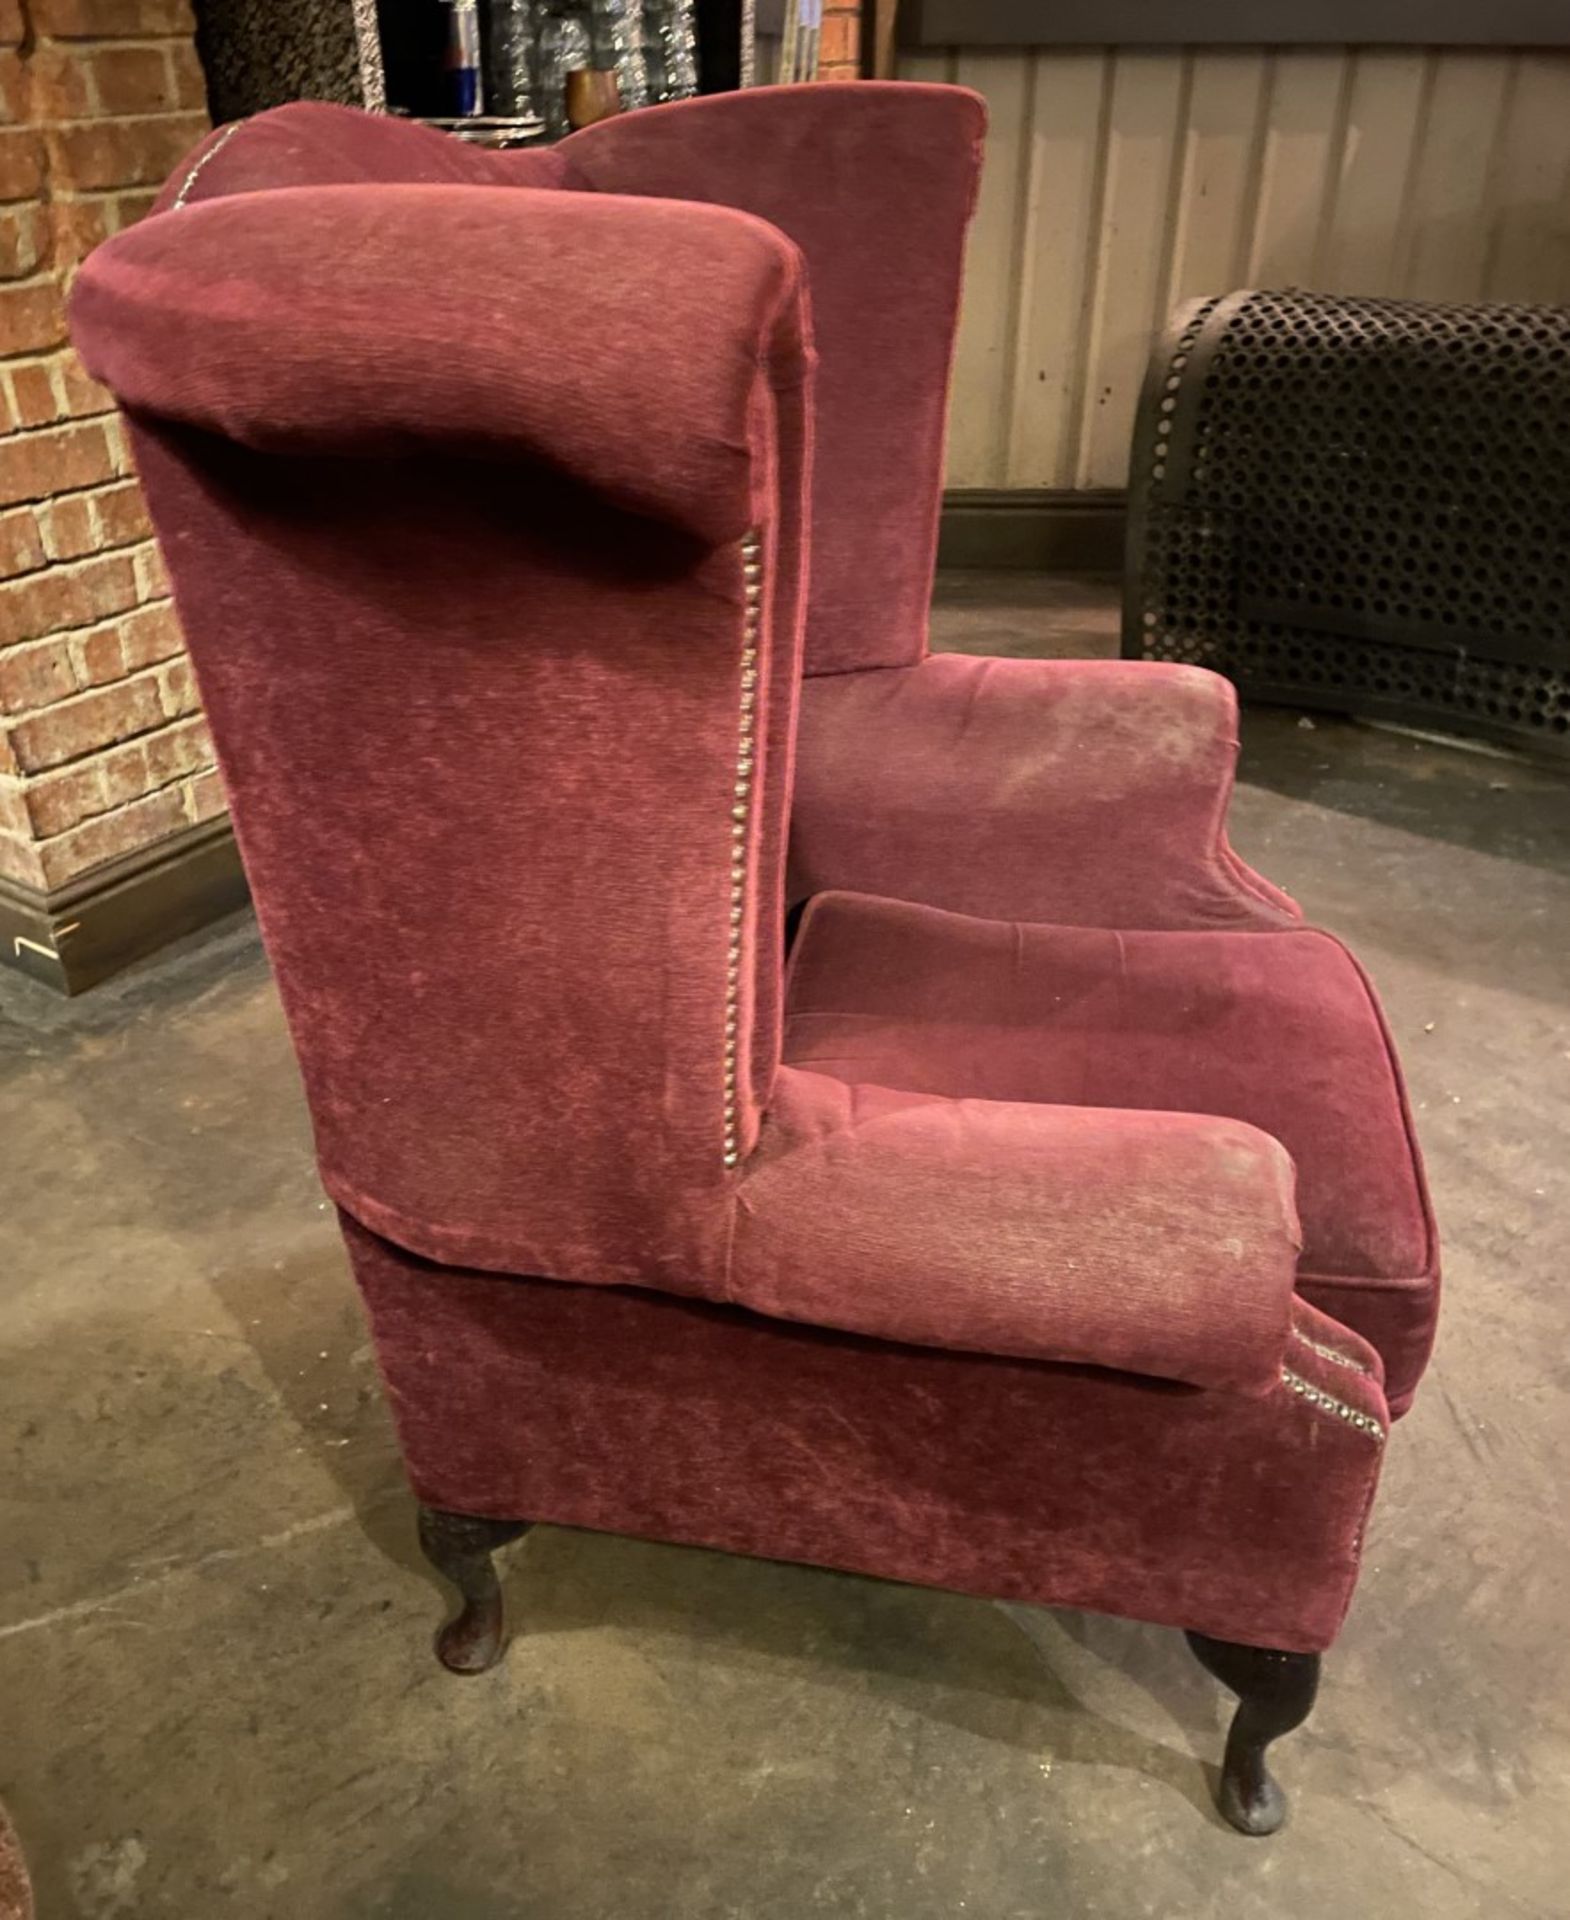 1 x Period-style Distressed Chesterfield Queen Anne High Button-Tufted Wing Back Armchair in Red - Image 8 of 9